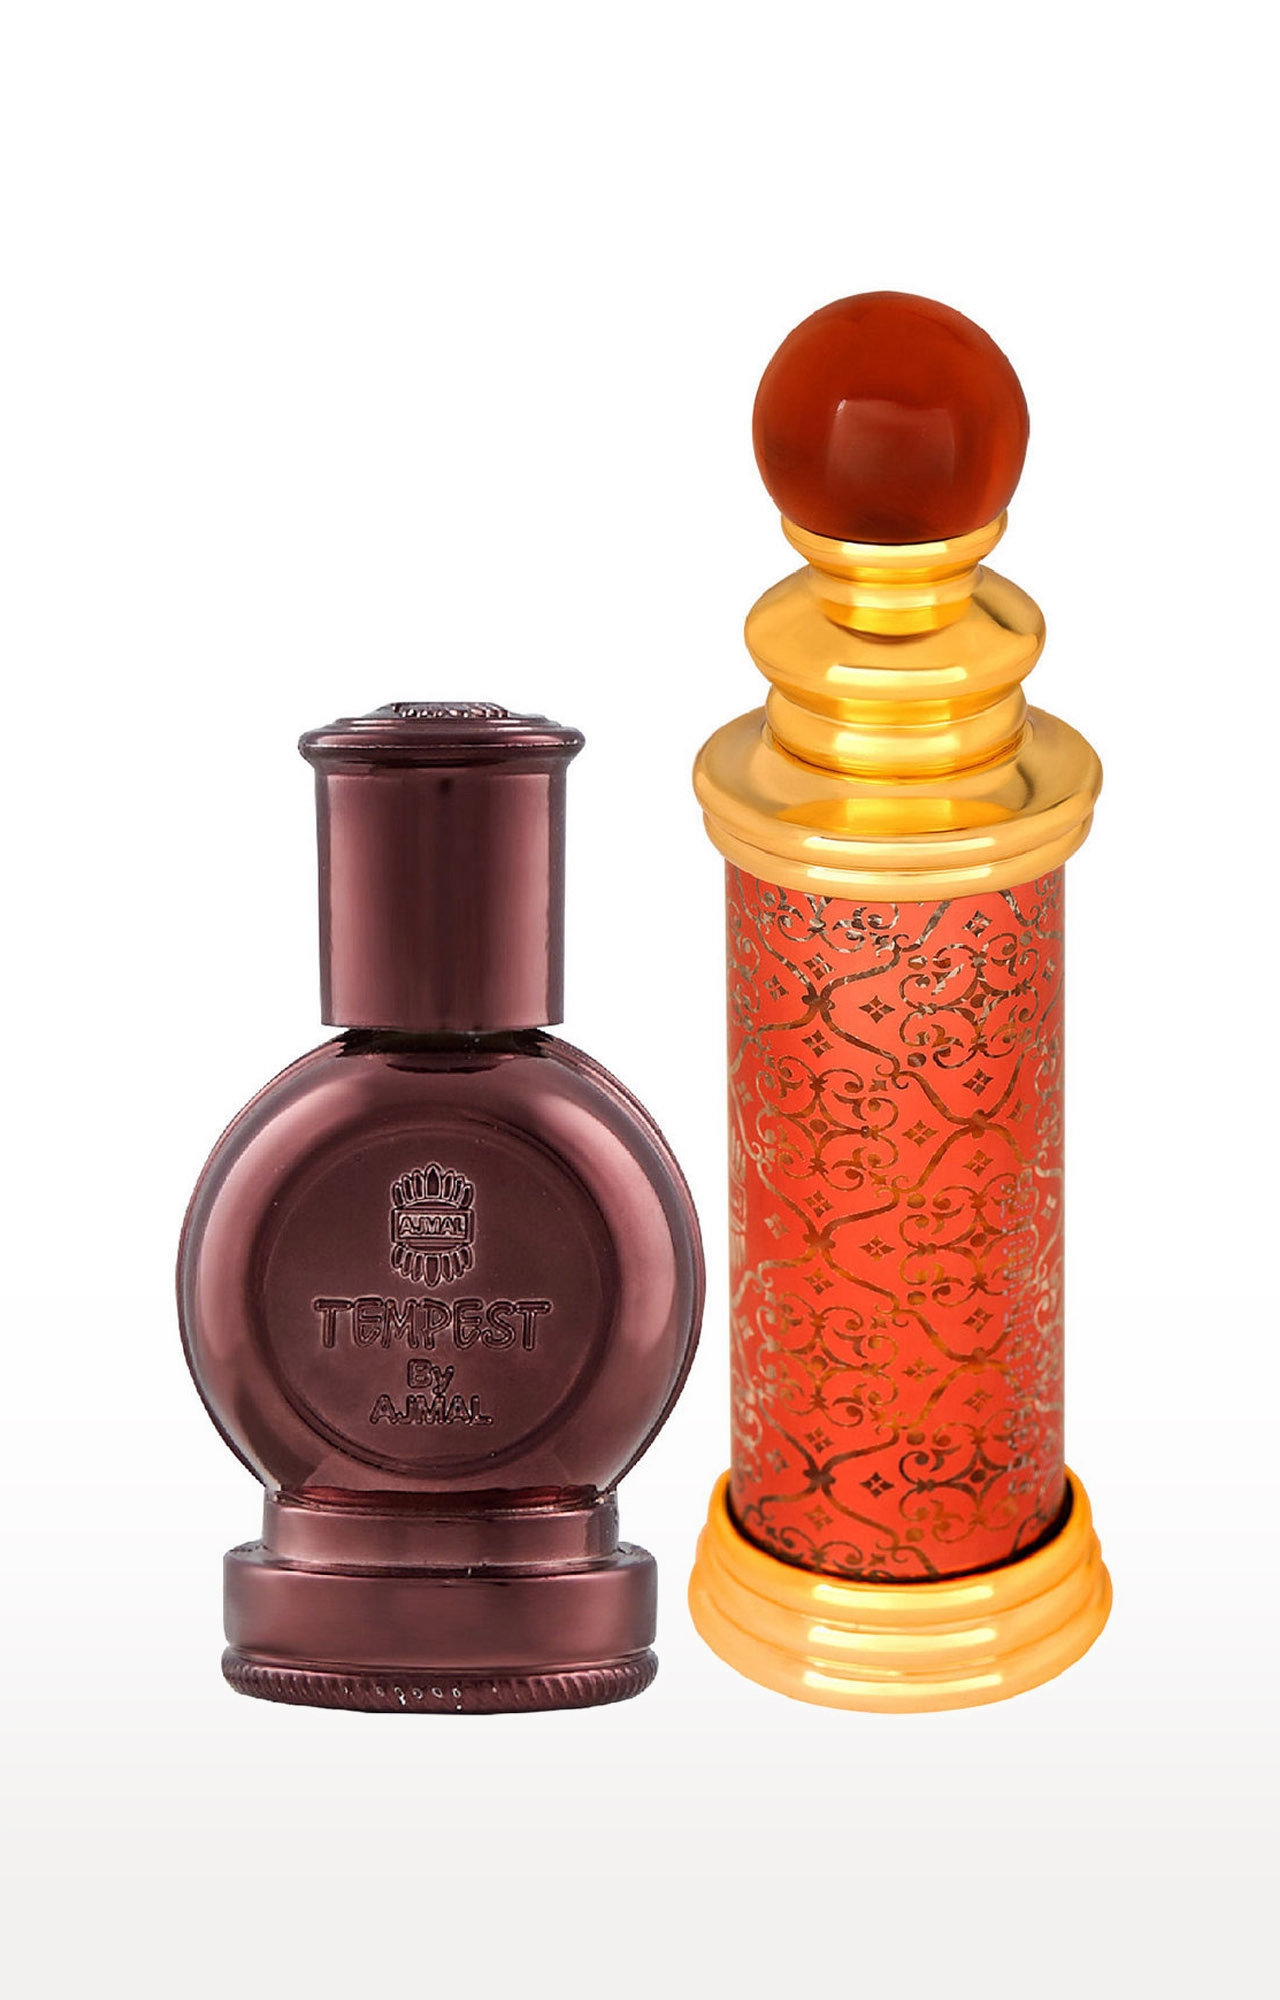 Ajmal | Ajmal Tempest Concentrated Perfume Oil Floral Alcohol-free Attar 12ml for Unisex and Classic Oud Concentrated Perfume Oil Woody Oudh Alcohol-free Attar 10ml for Unisex + 2 Parfum Testers FREE